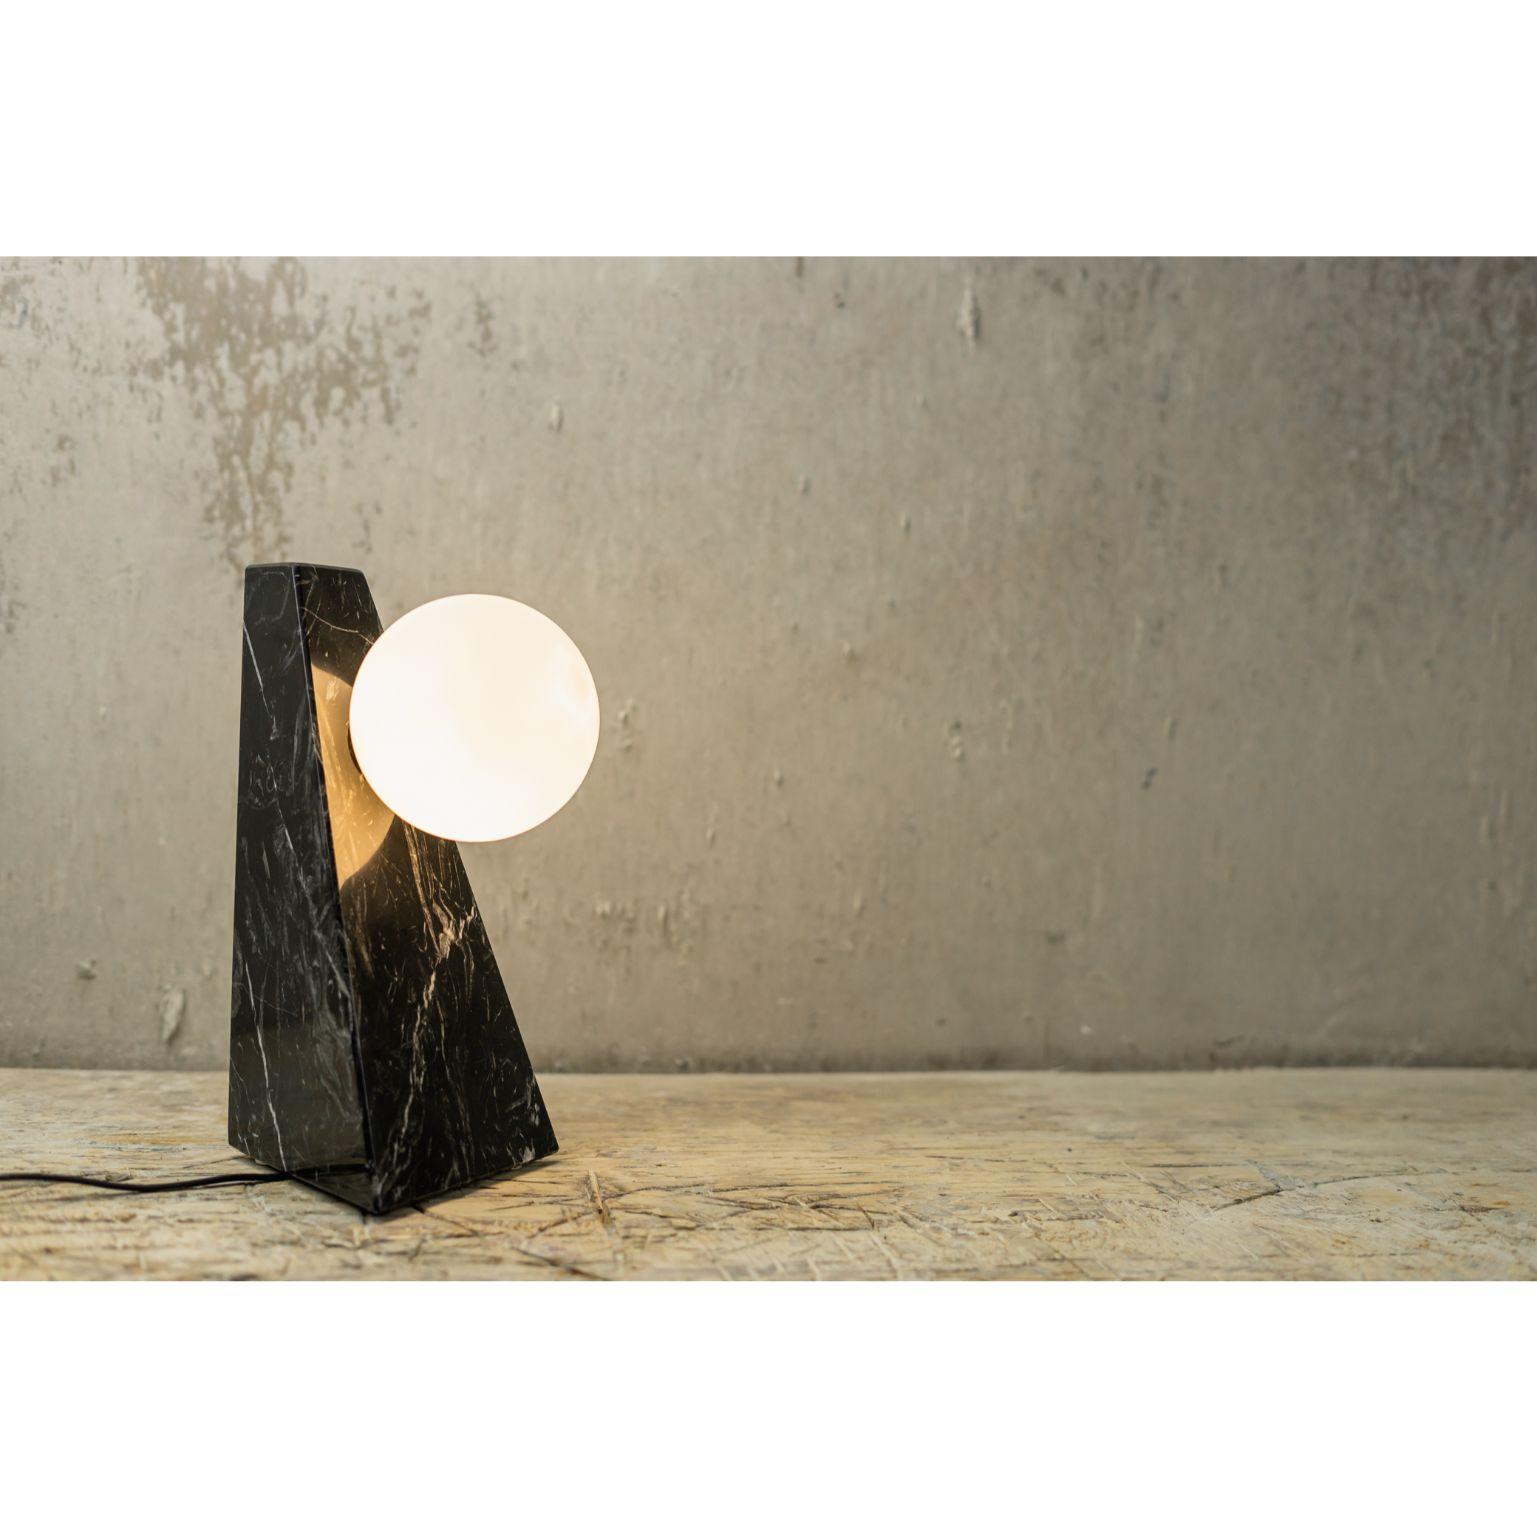 Point of contact marble lamp by Essenzia
Materials: Nero Marquina
Dimensions: 30 x 18 x 20 cm

Also Available: Carrara, India Green

Table lamp that explores the concept of gravity suspension and interaction between two different cosmic